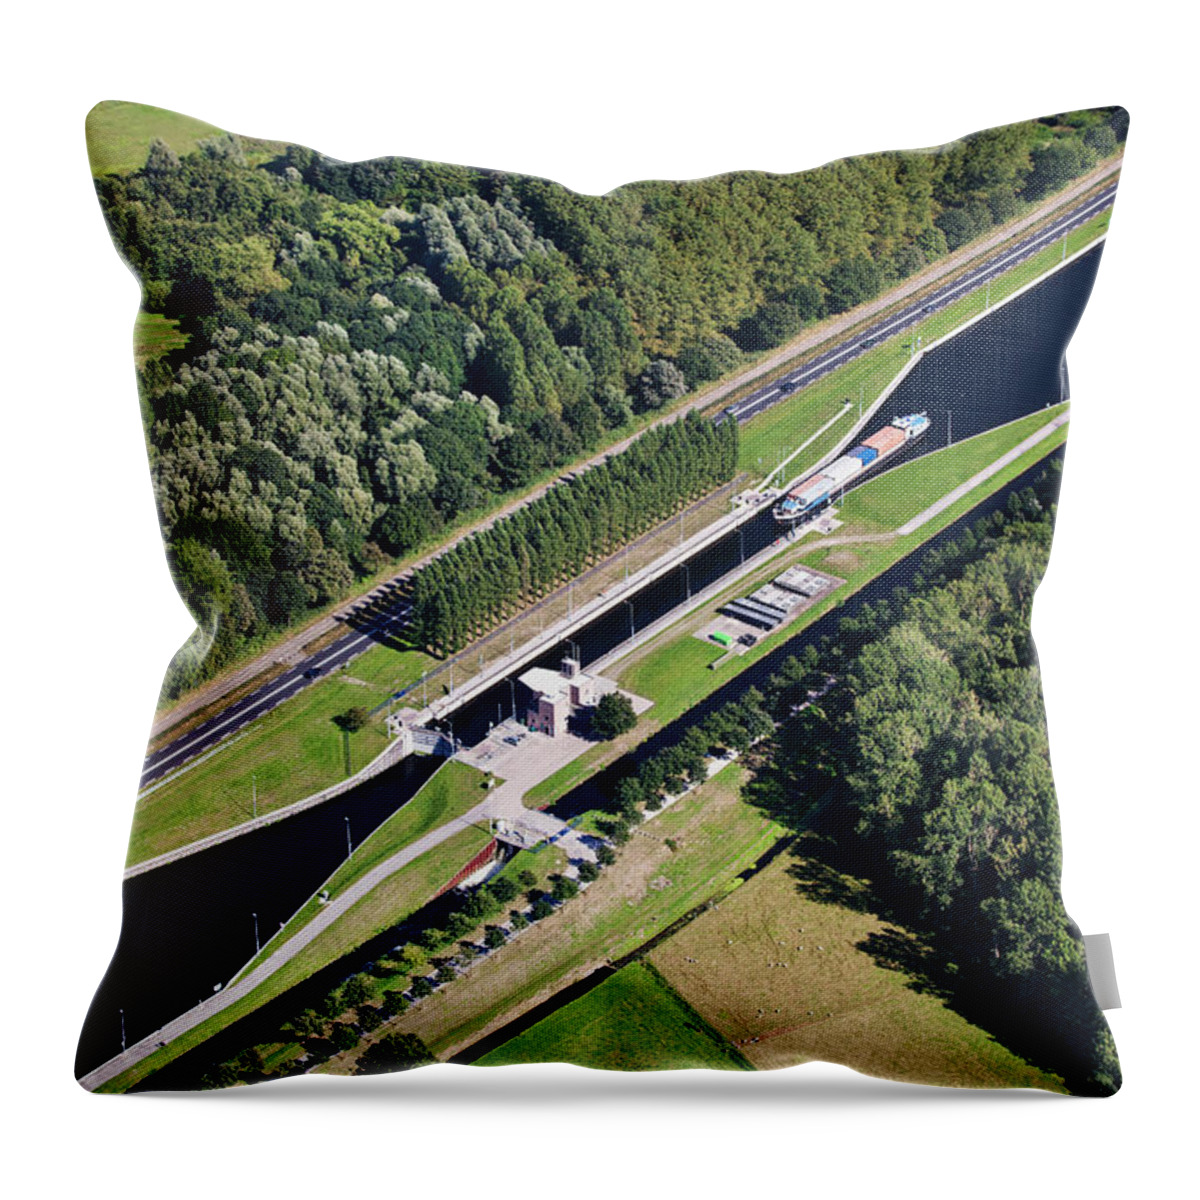 Scenics Throw Pillow featuring the photograph Netherlands, Heeswijk Dinther, Ship by Frans Lemmens